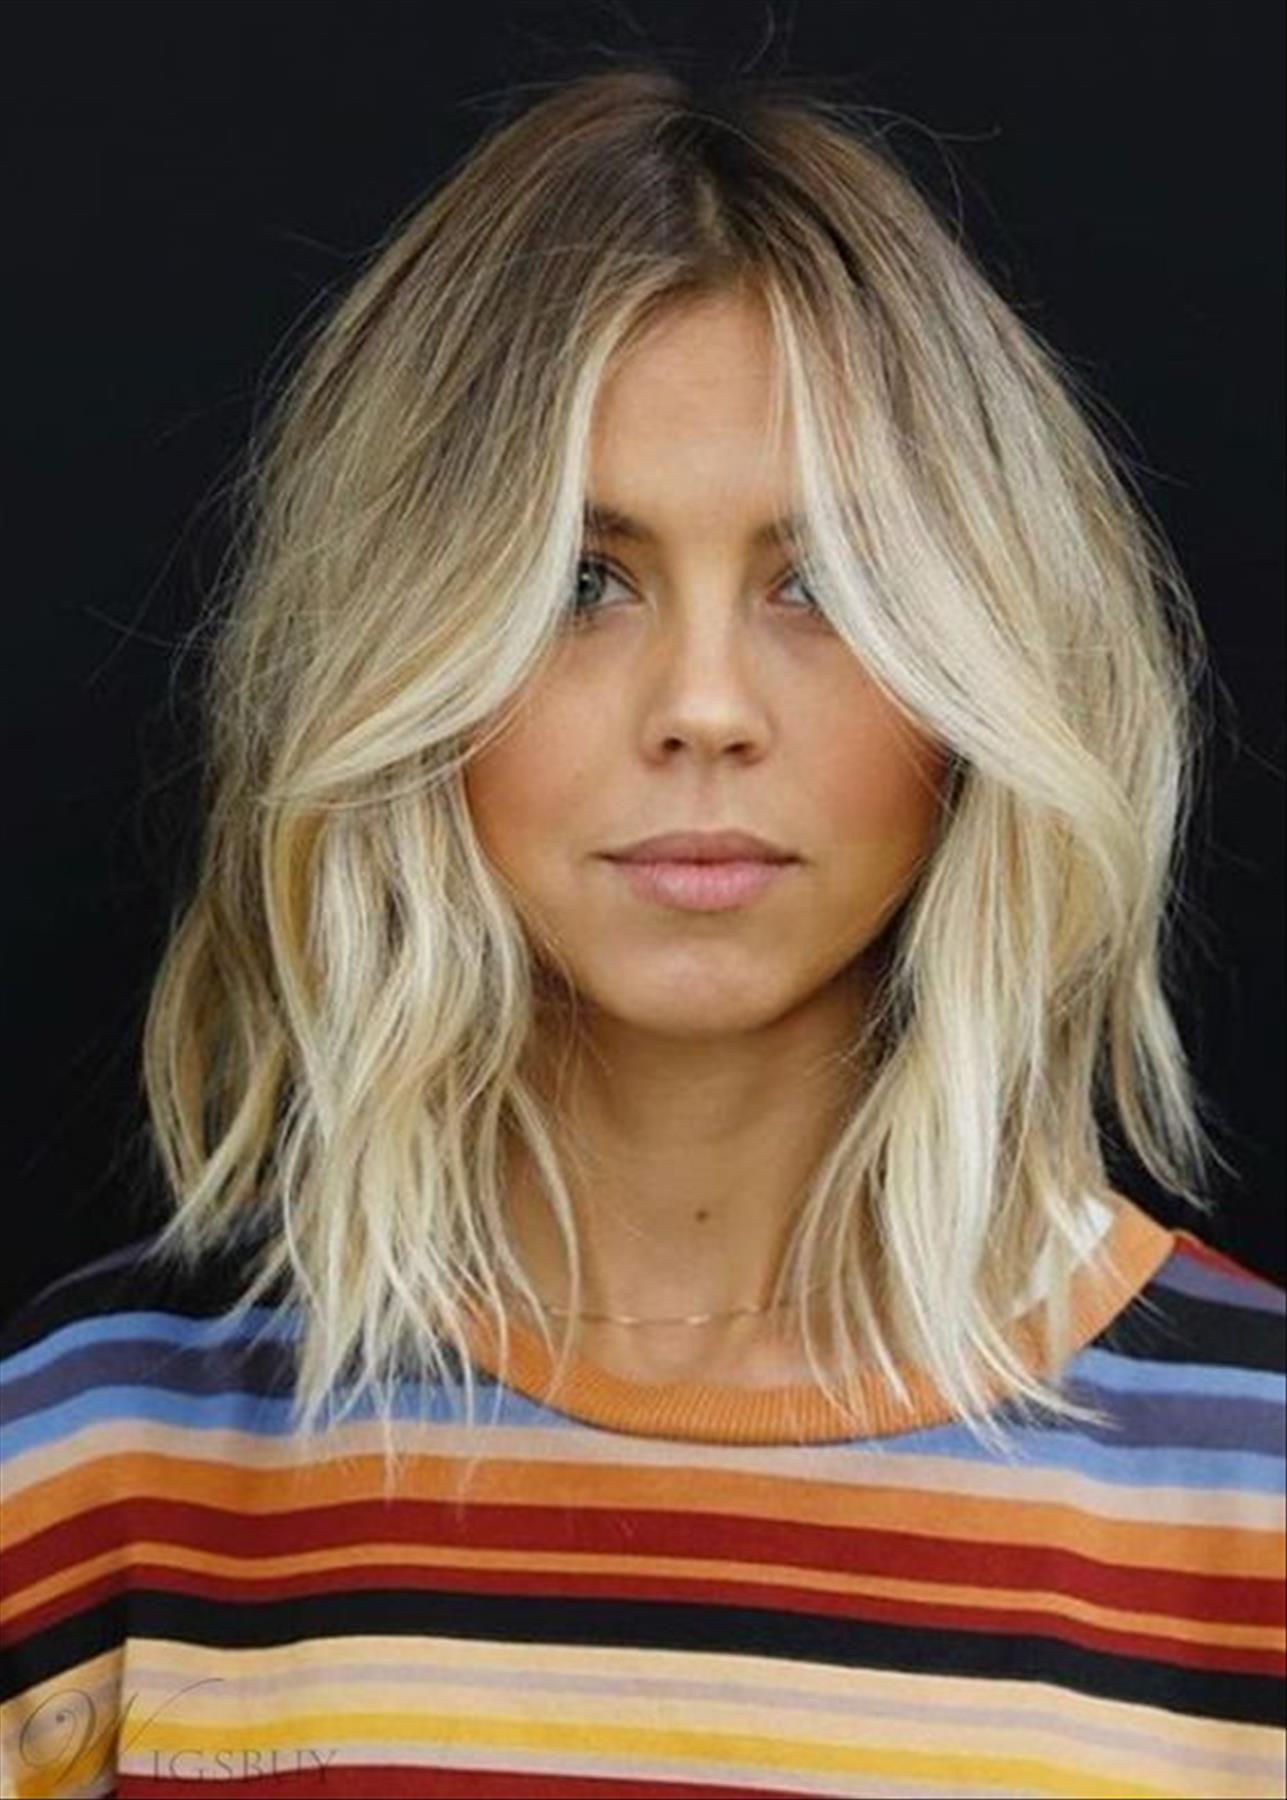 Best Fine Hair Haircuts 2022 trends for stylish women